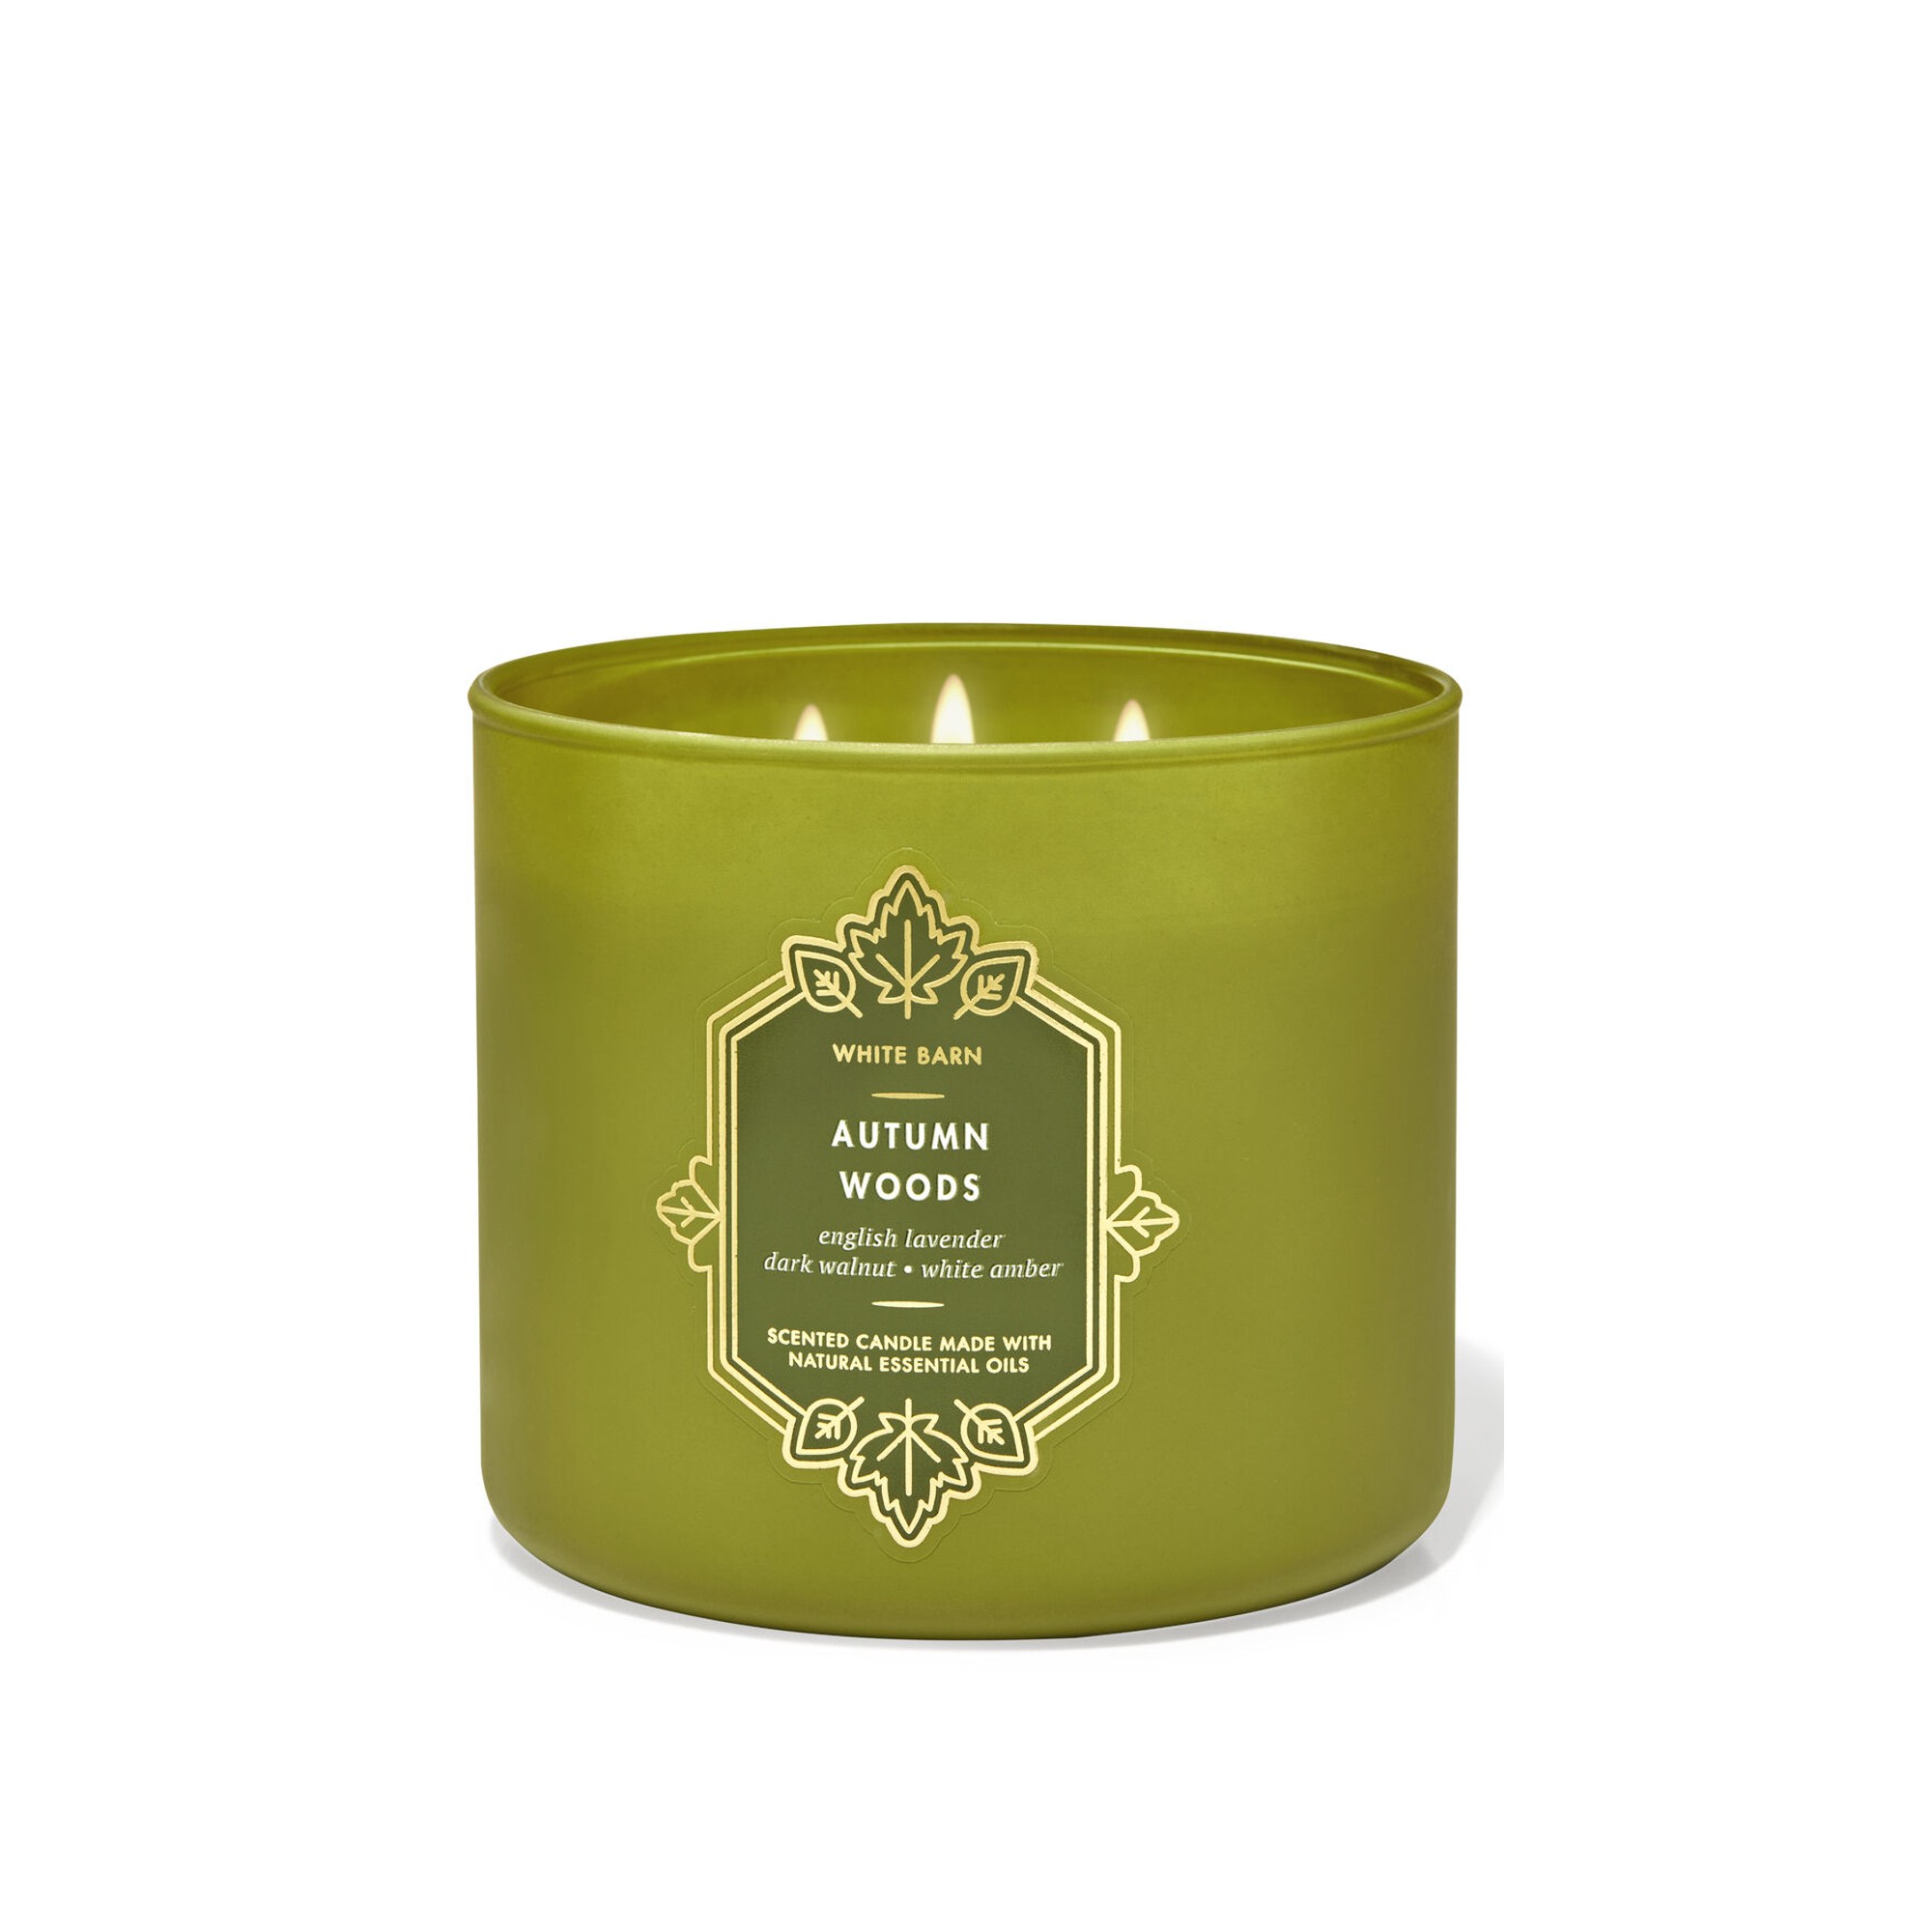 Bath & Body Works White Barn Autumn Woods 3 Wick Scented Candle